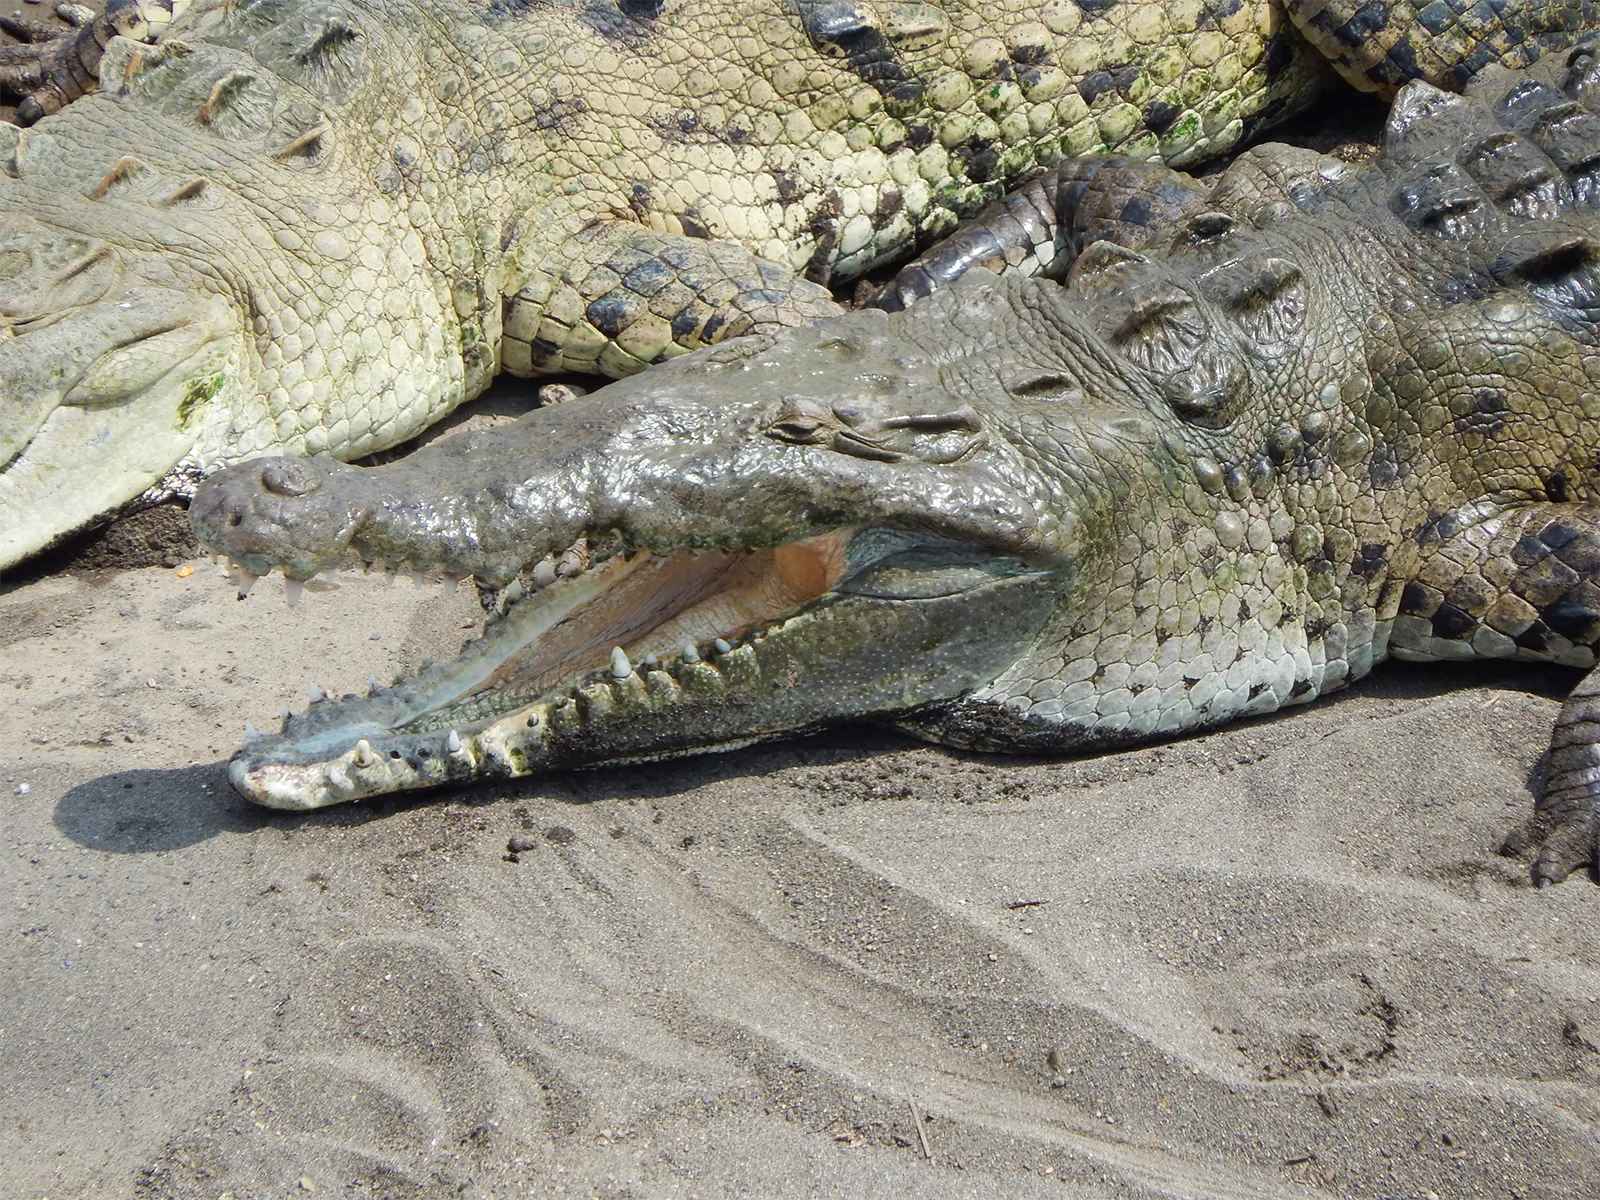 The Ultimate Guide To Differentiating Crocodiles, Caimans, Gharials, And Alligators